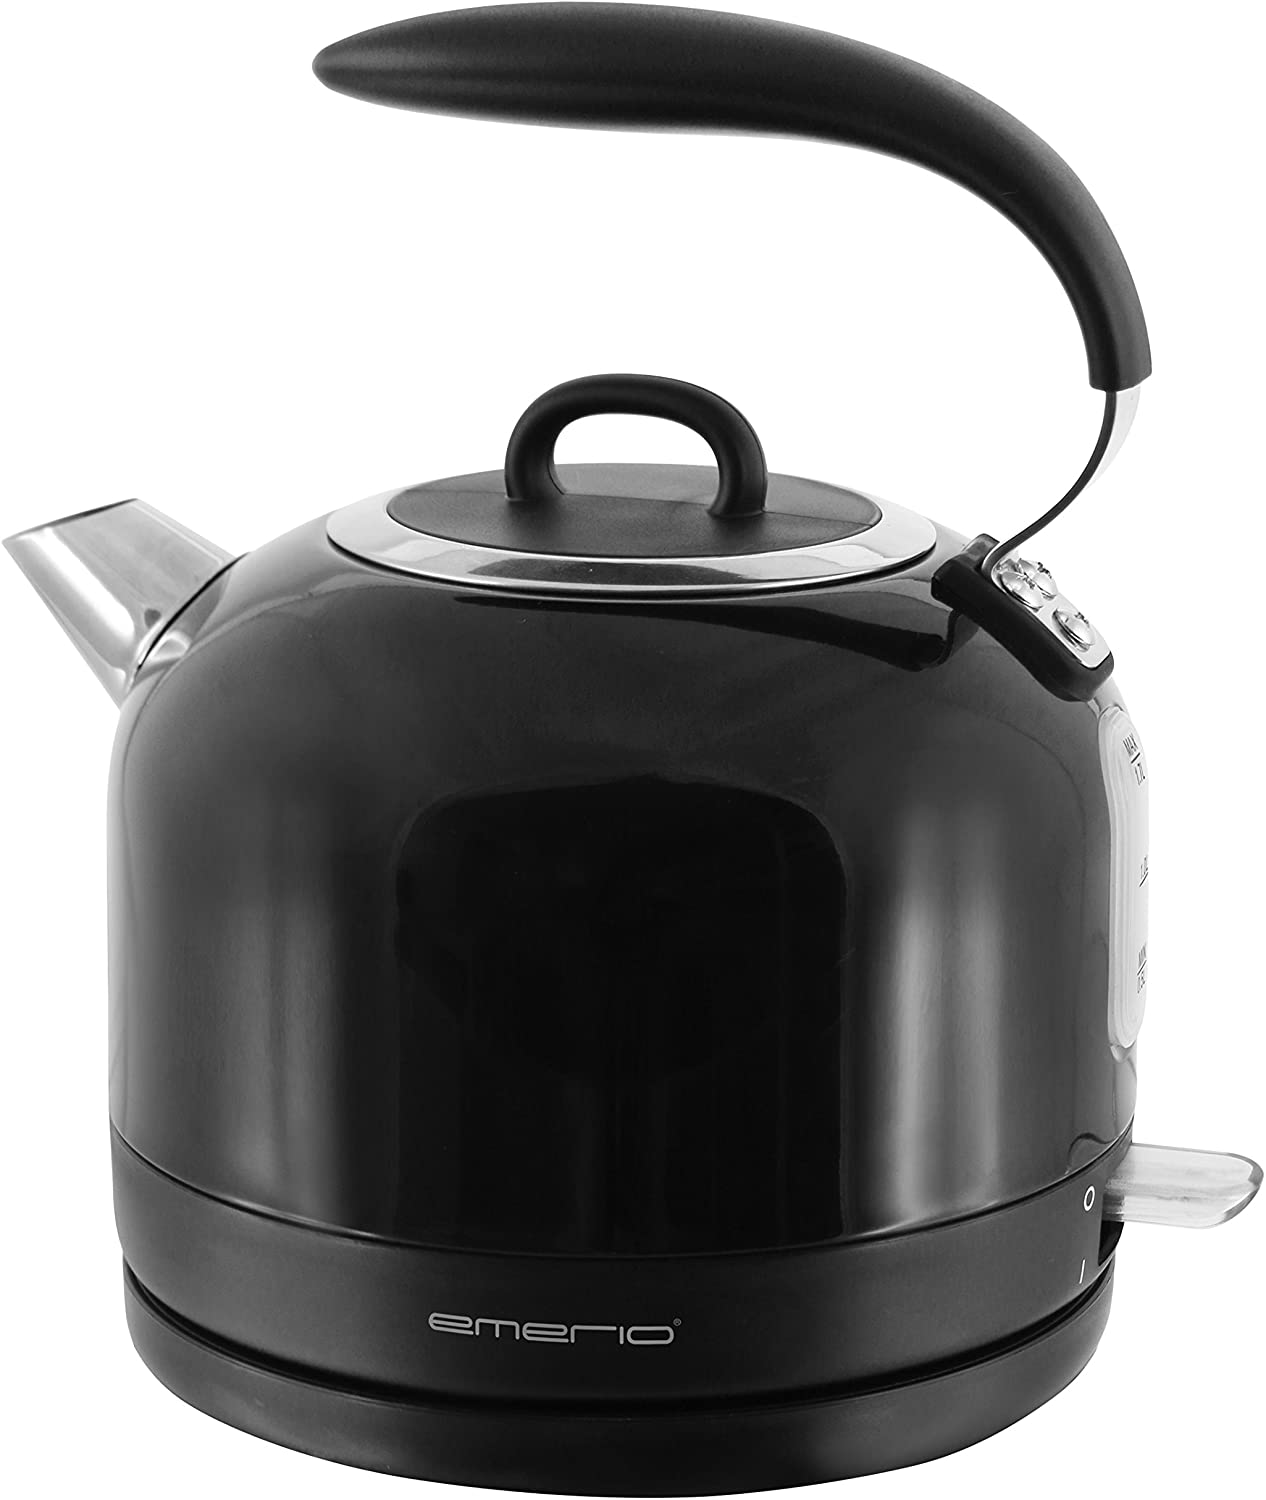 Emerio WK 111081 Cordless Electric Kettle 1.7 Litre Capacity, Stainless Steel Case, Black, 2200 Watt, 360 ° base, Dry Protection, Limescale Filter Wire Automatic Switch Off